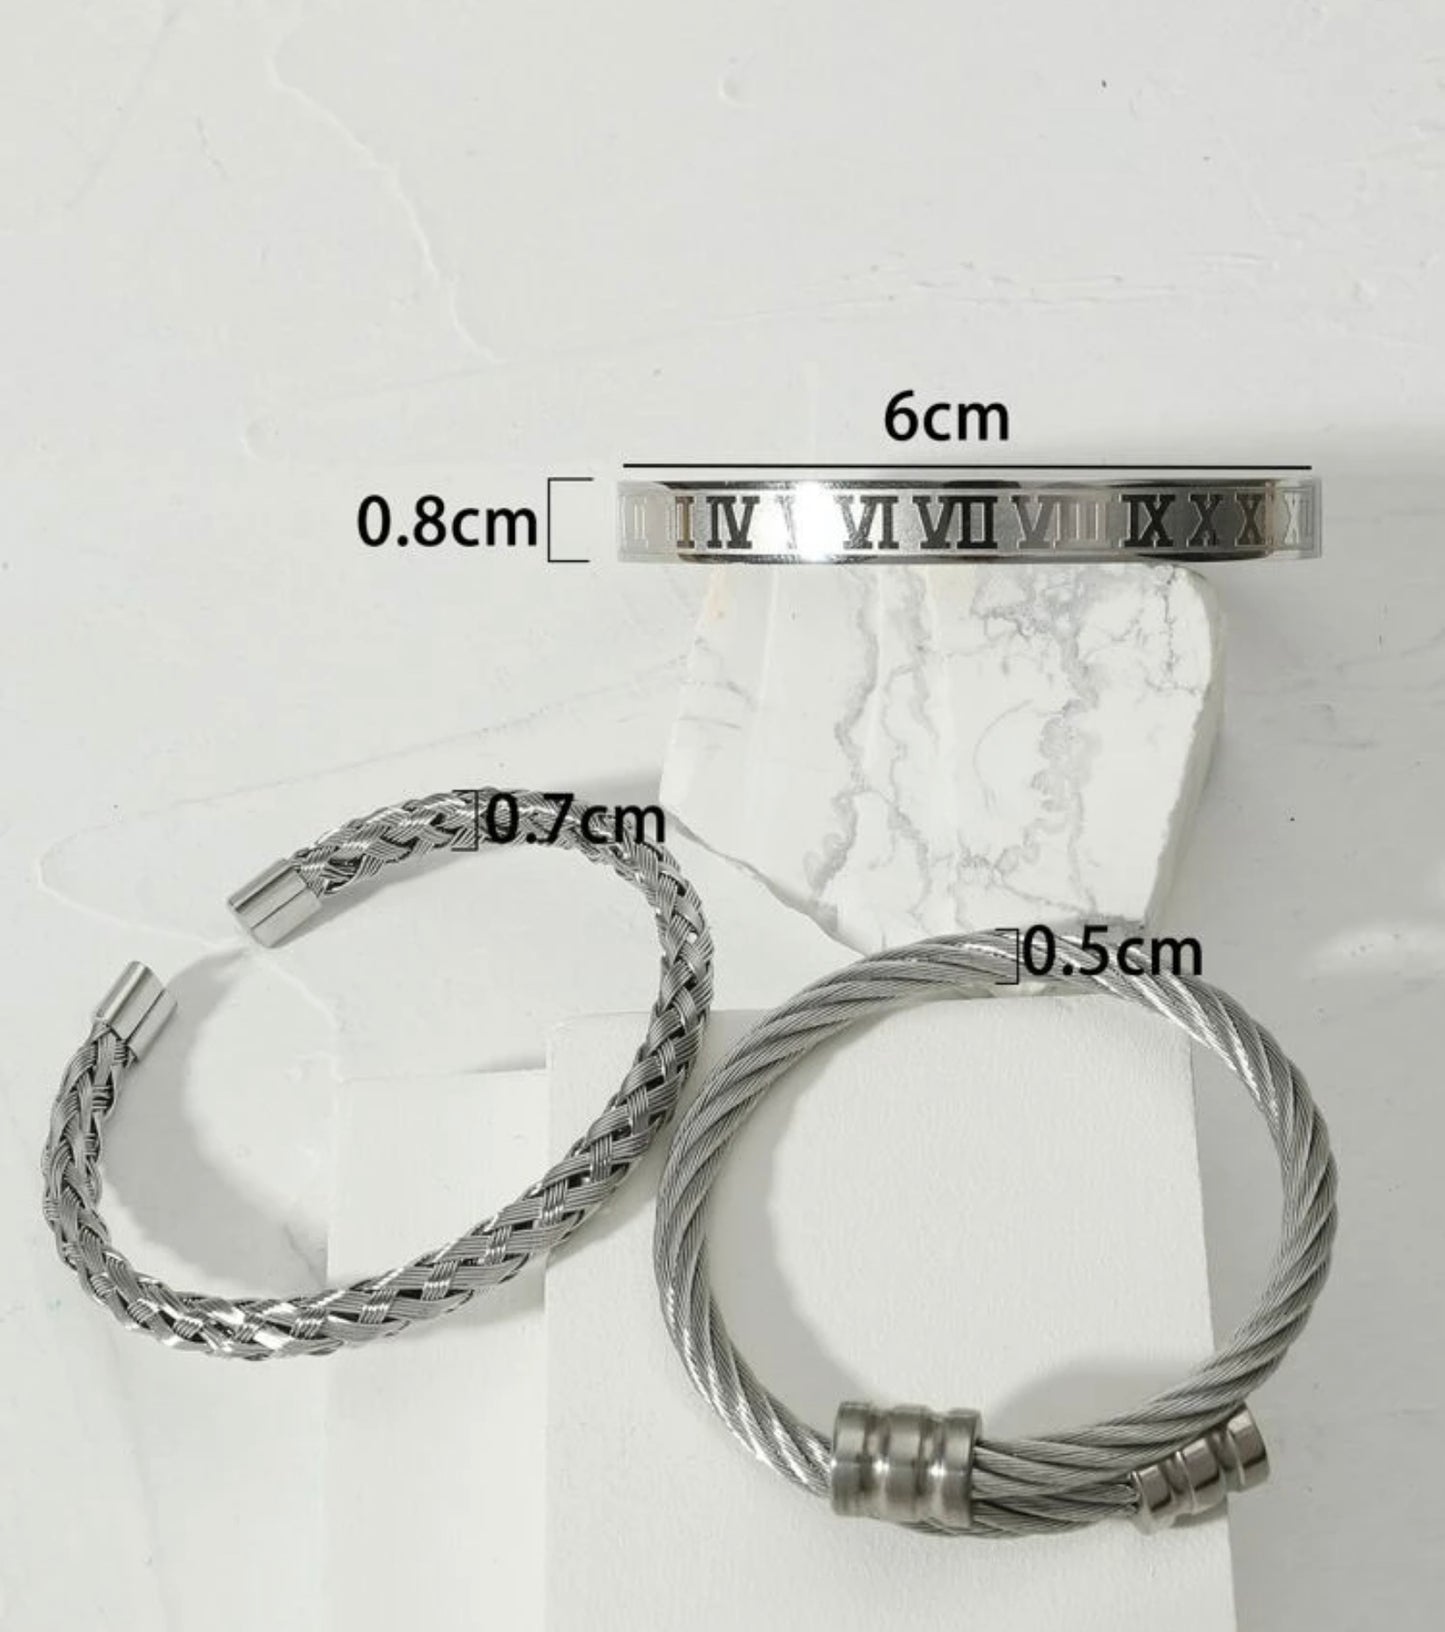 3pc Stainless Steel Silver Band Set